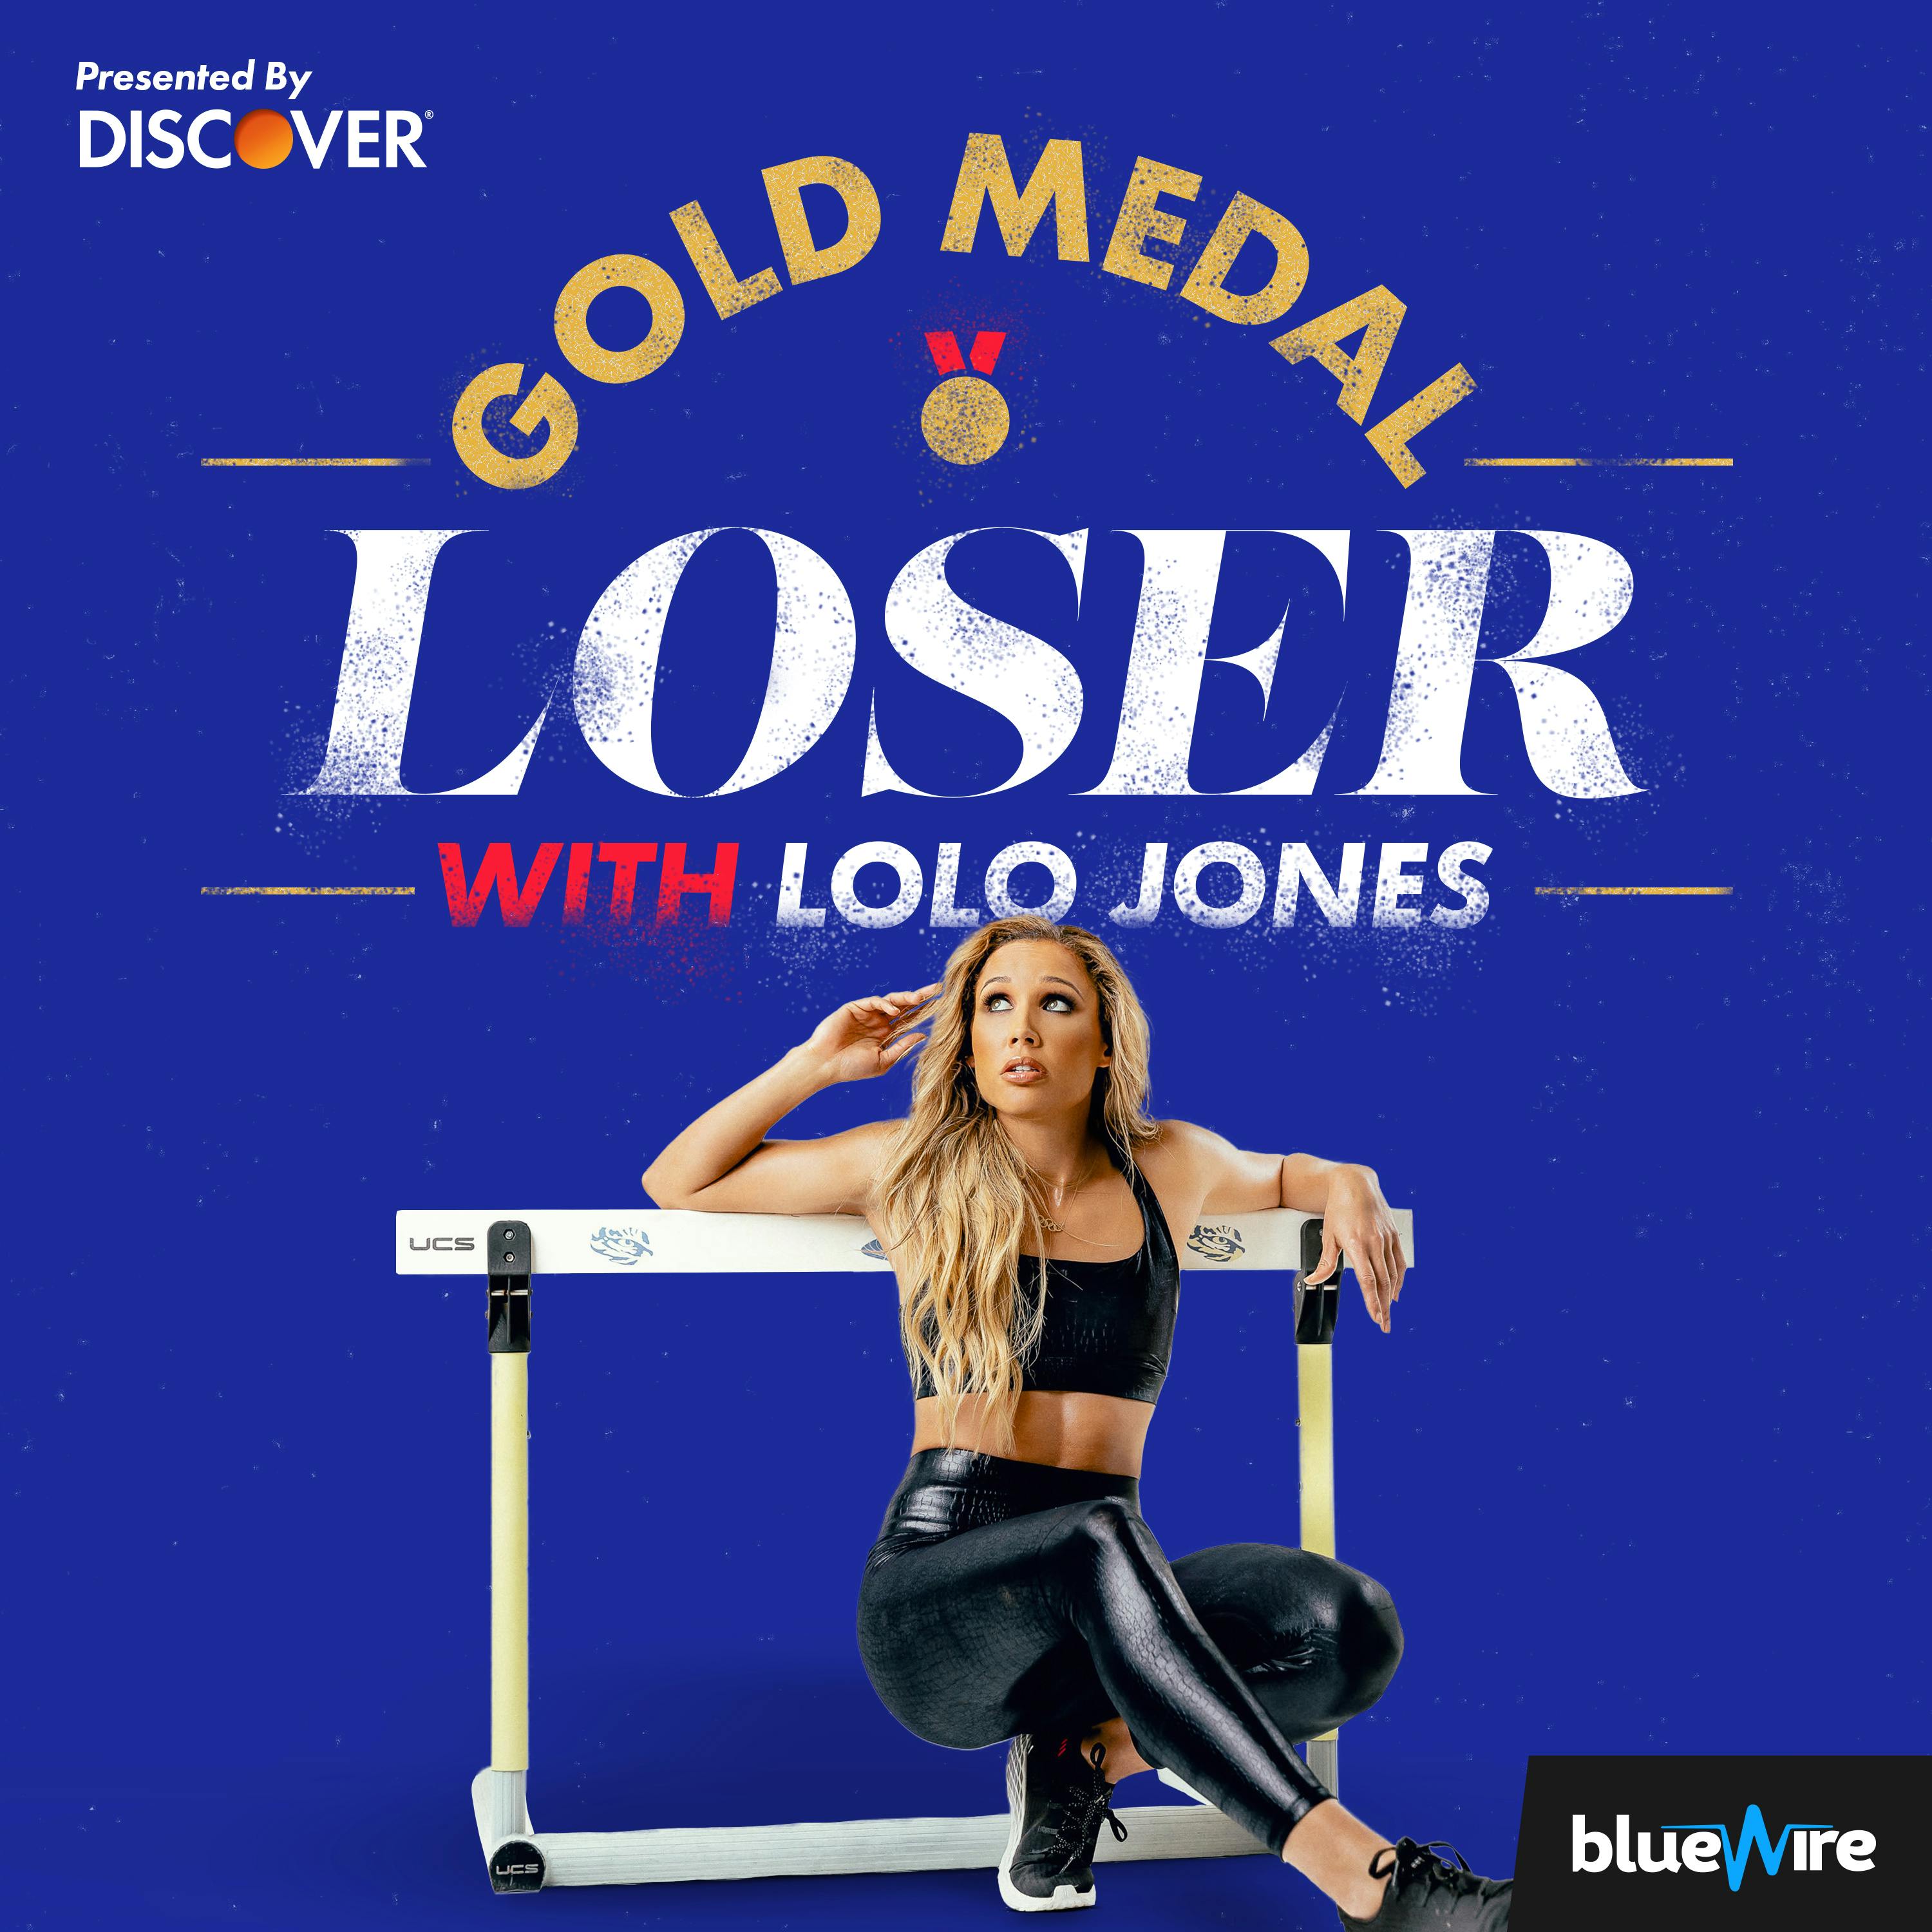 Gold Medal Loser with Lolo Jones